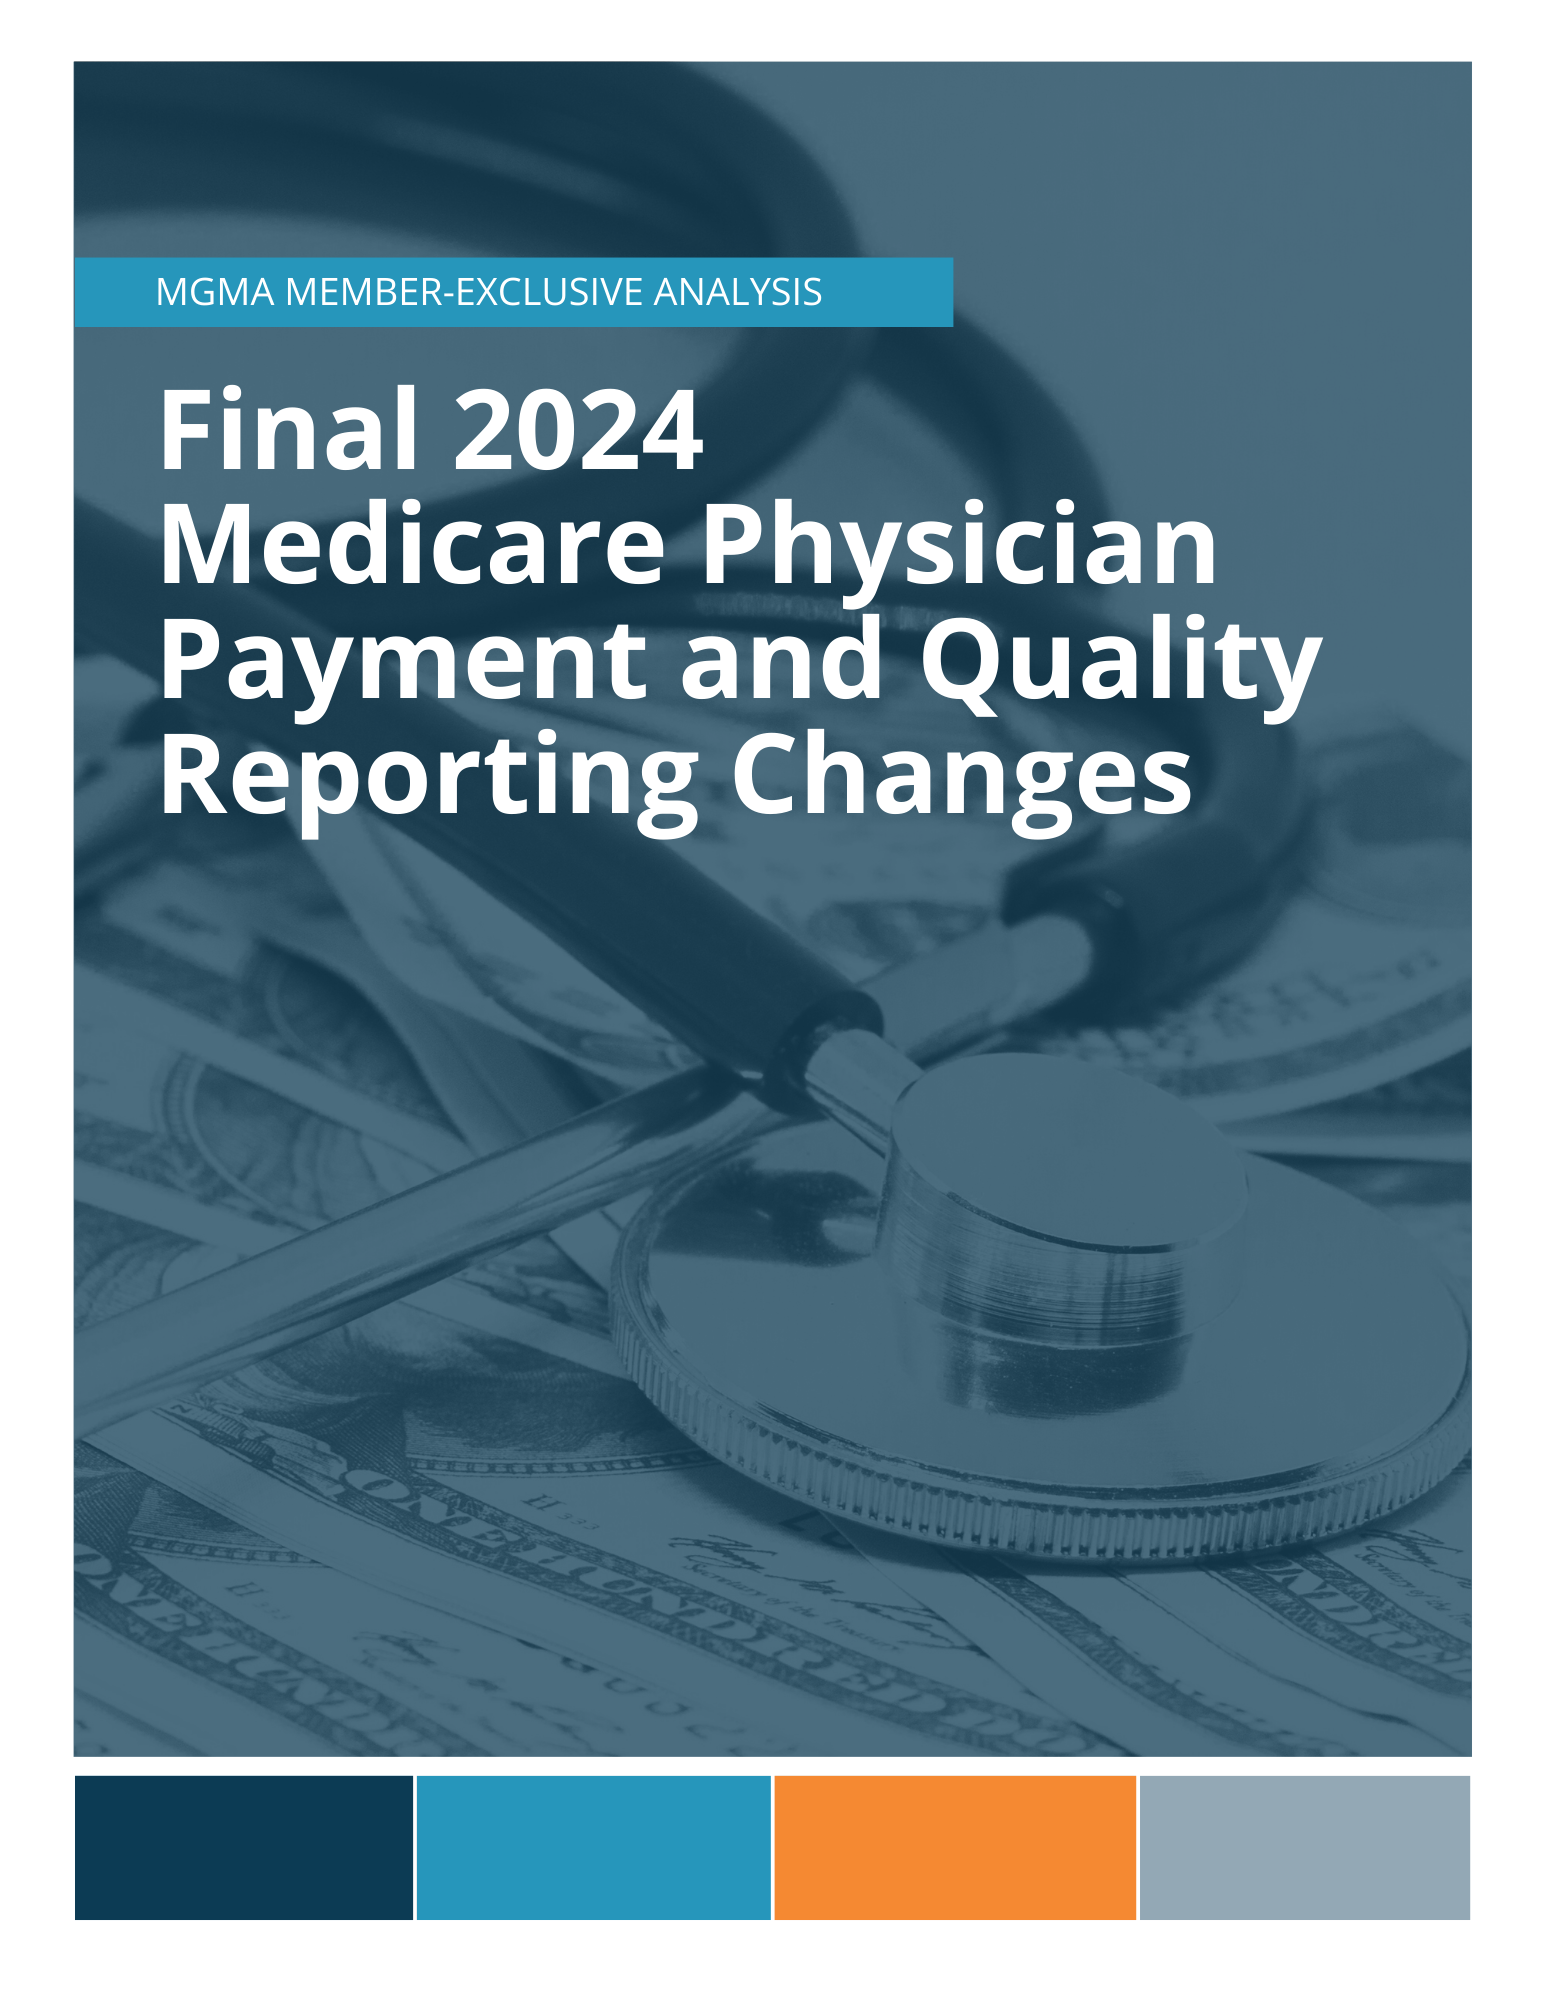 Analysis Final 2024 Medicare Physician Payment and Quality Reporting